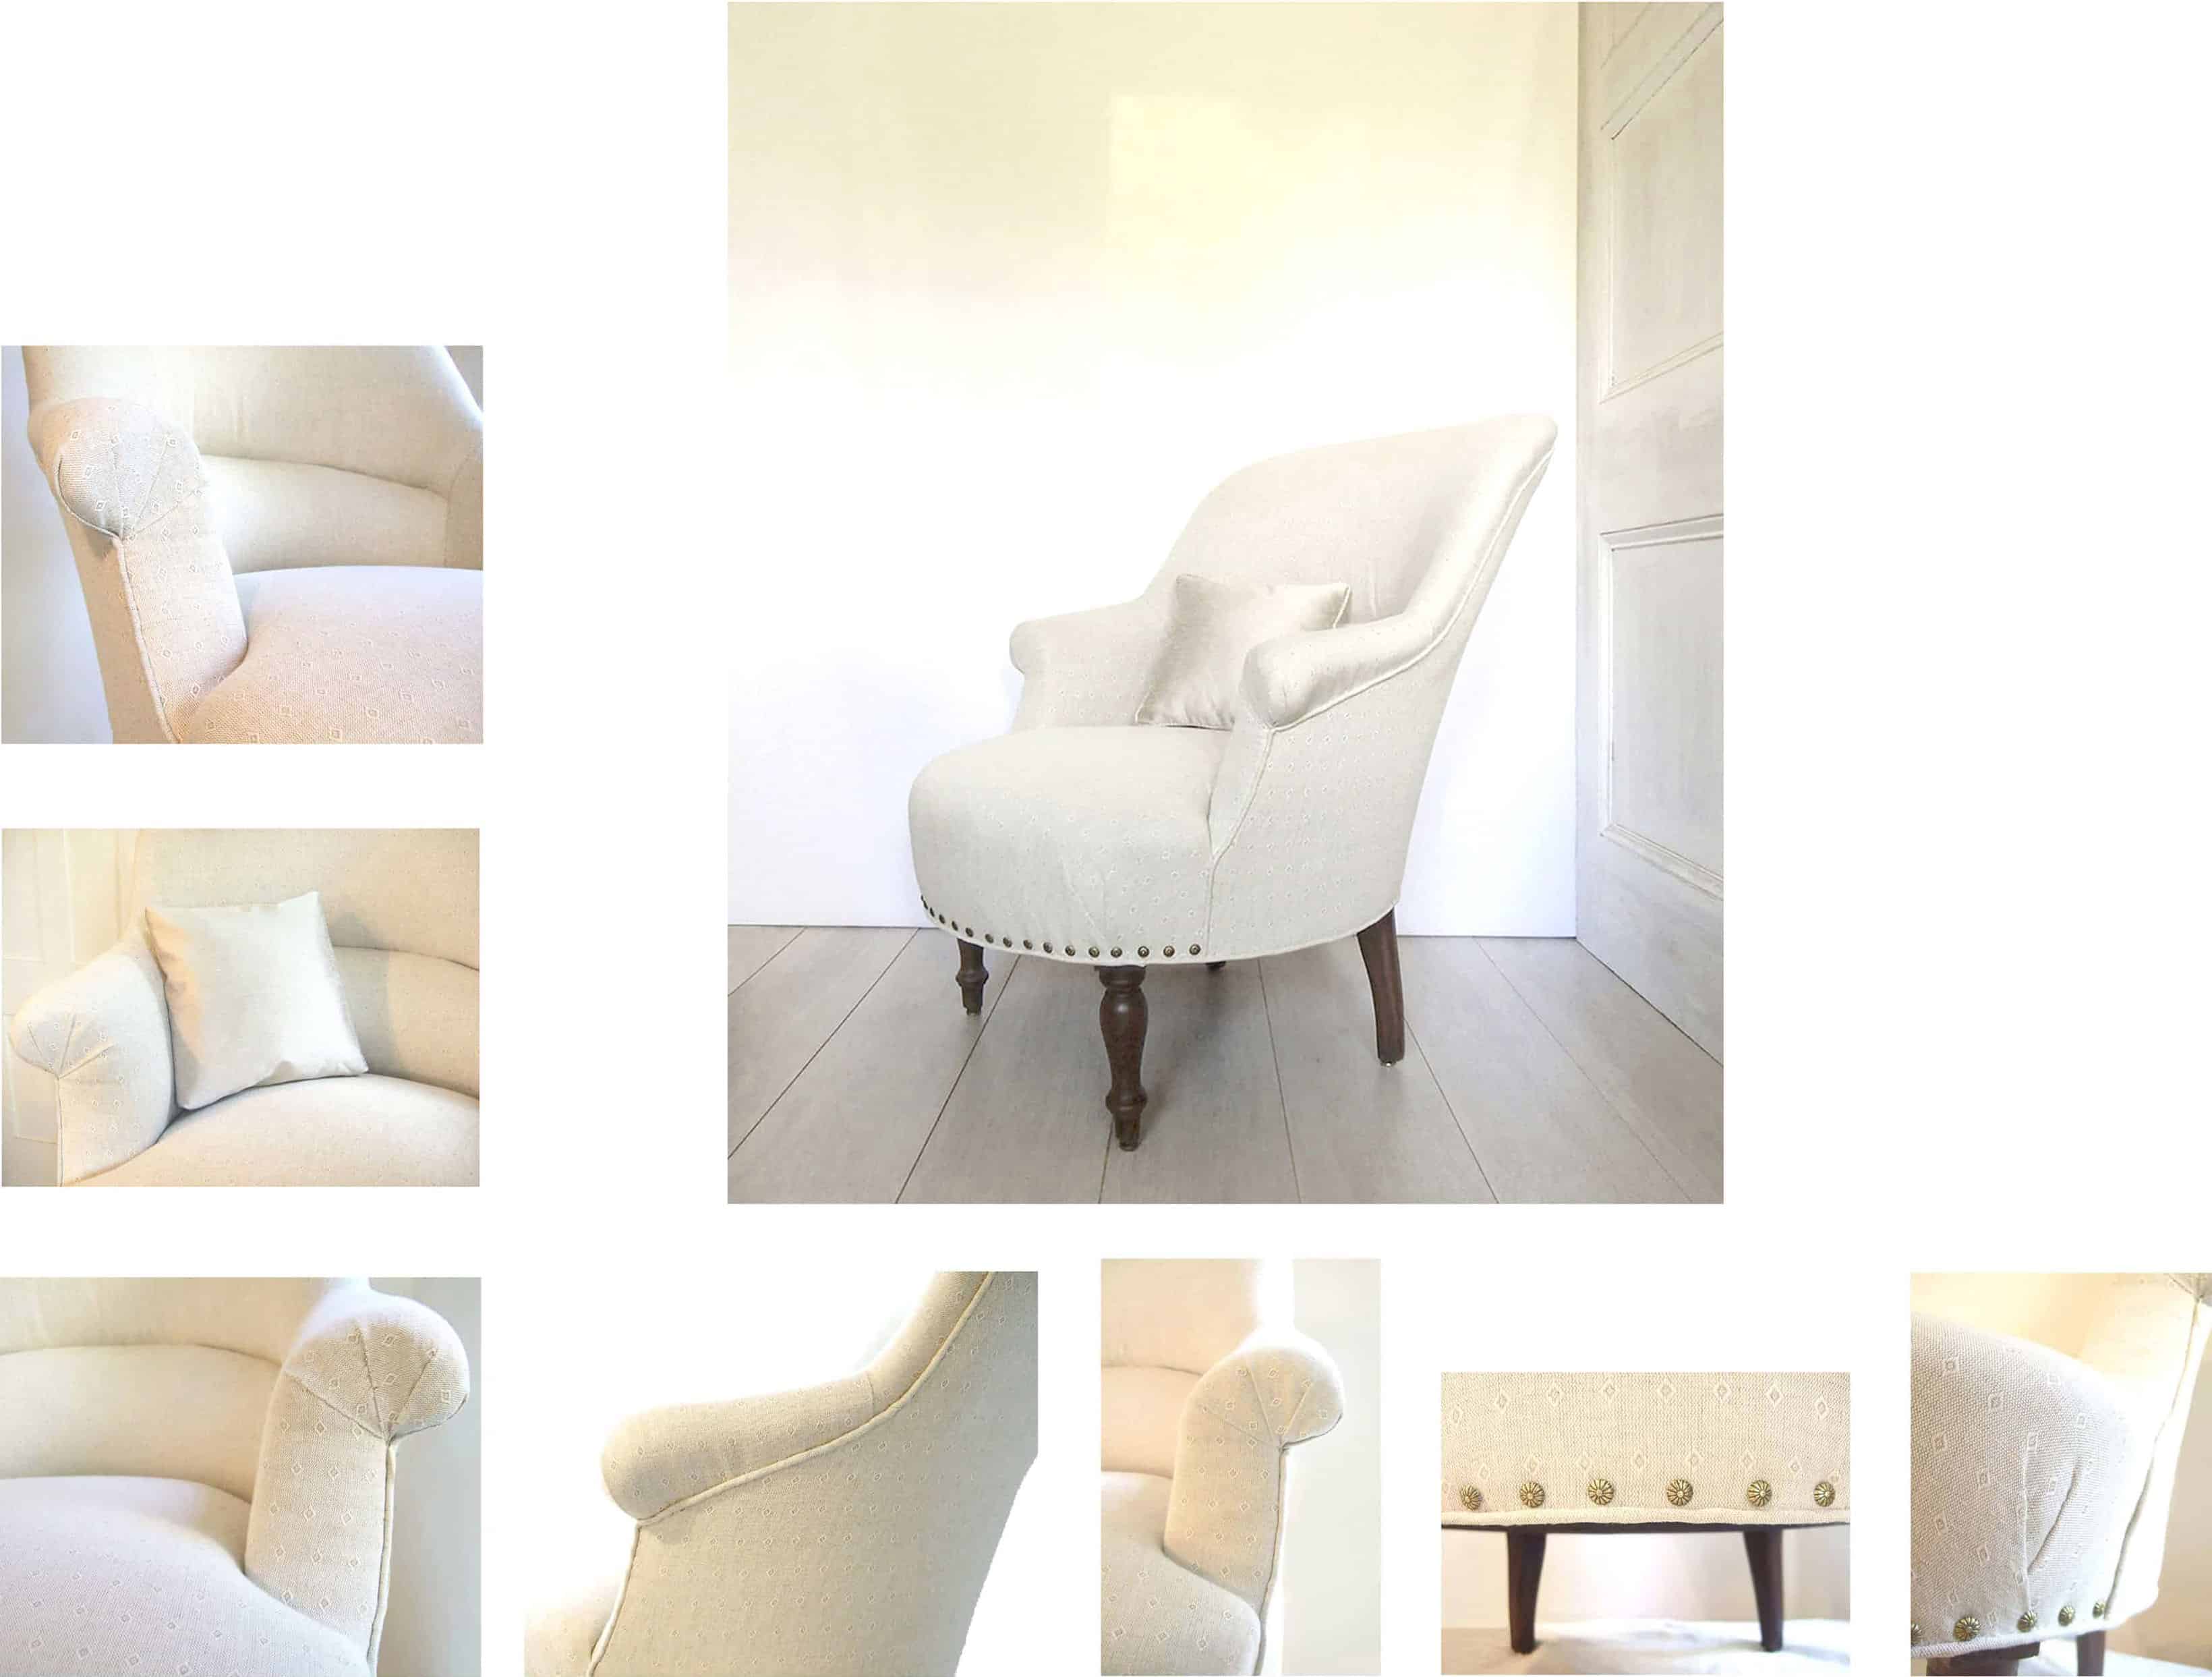 Complete restoration and reupholstery of Fauteuil Crapaud.